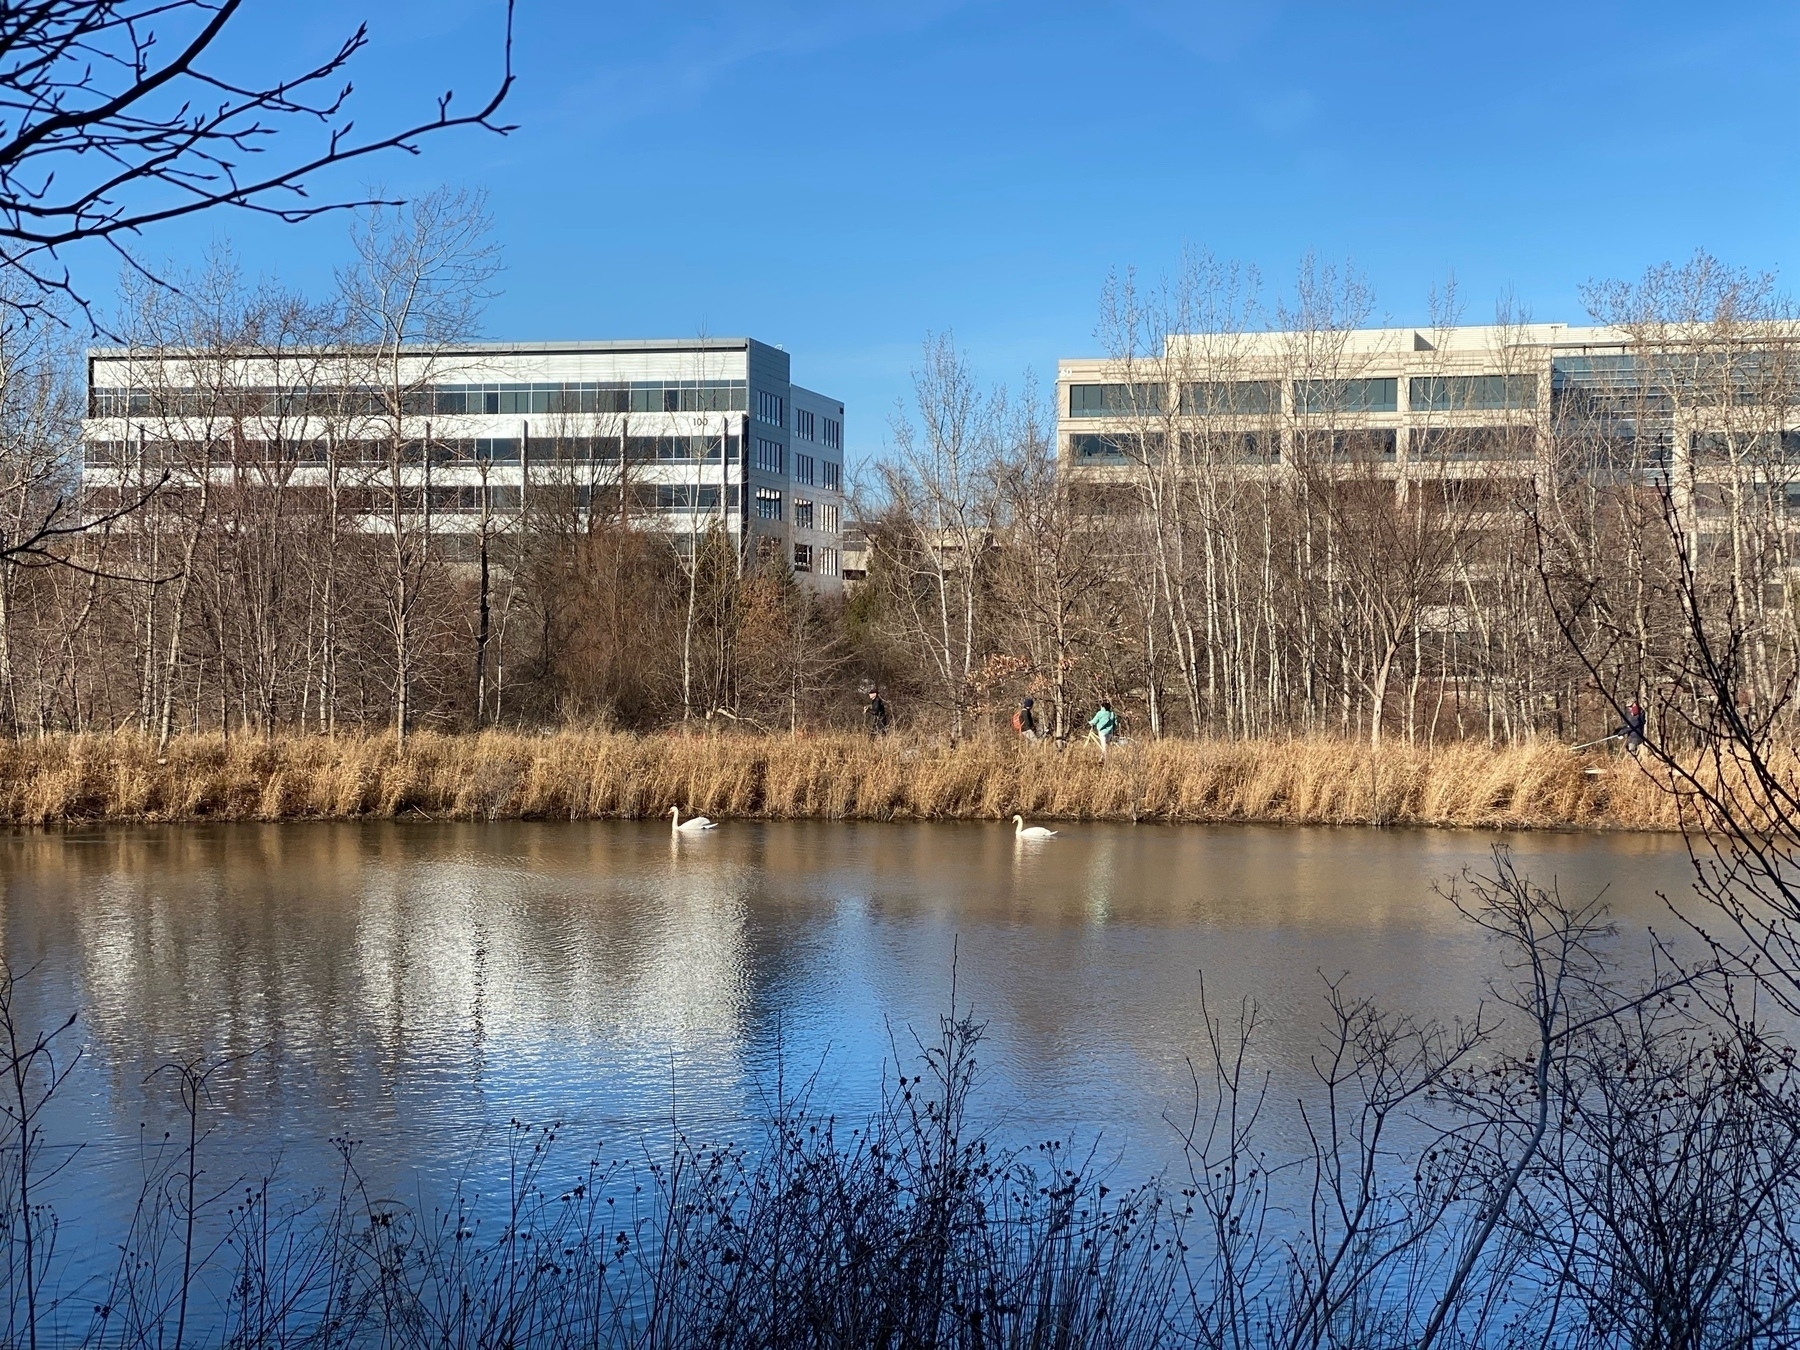 Two white swans swimming in a pond with two white office buildings in the background.